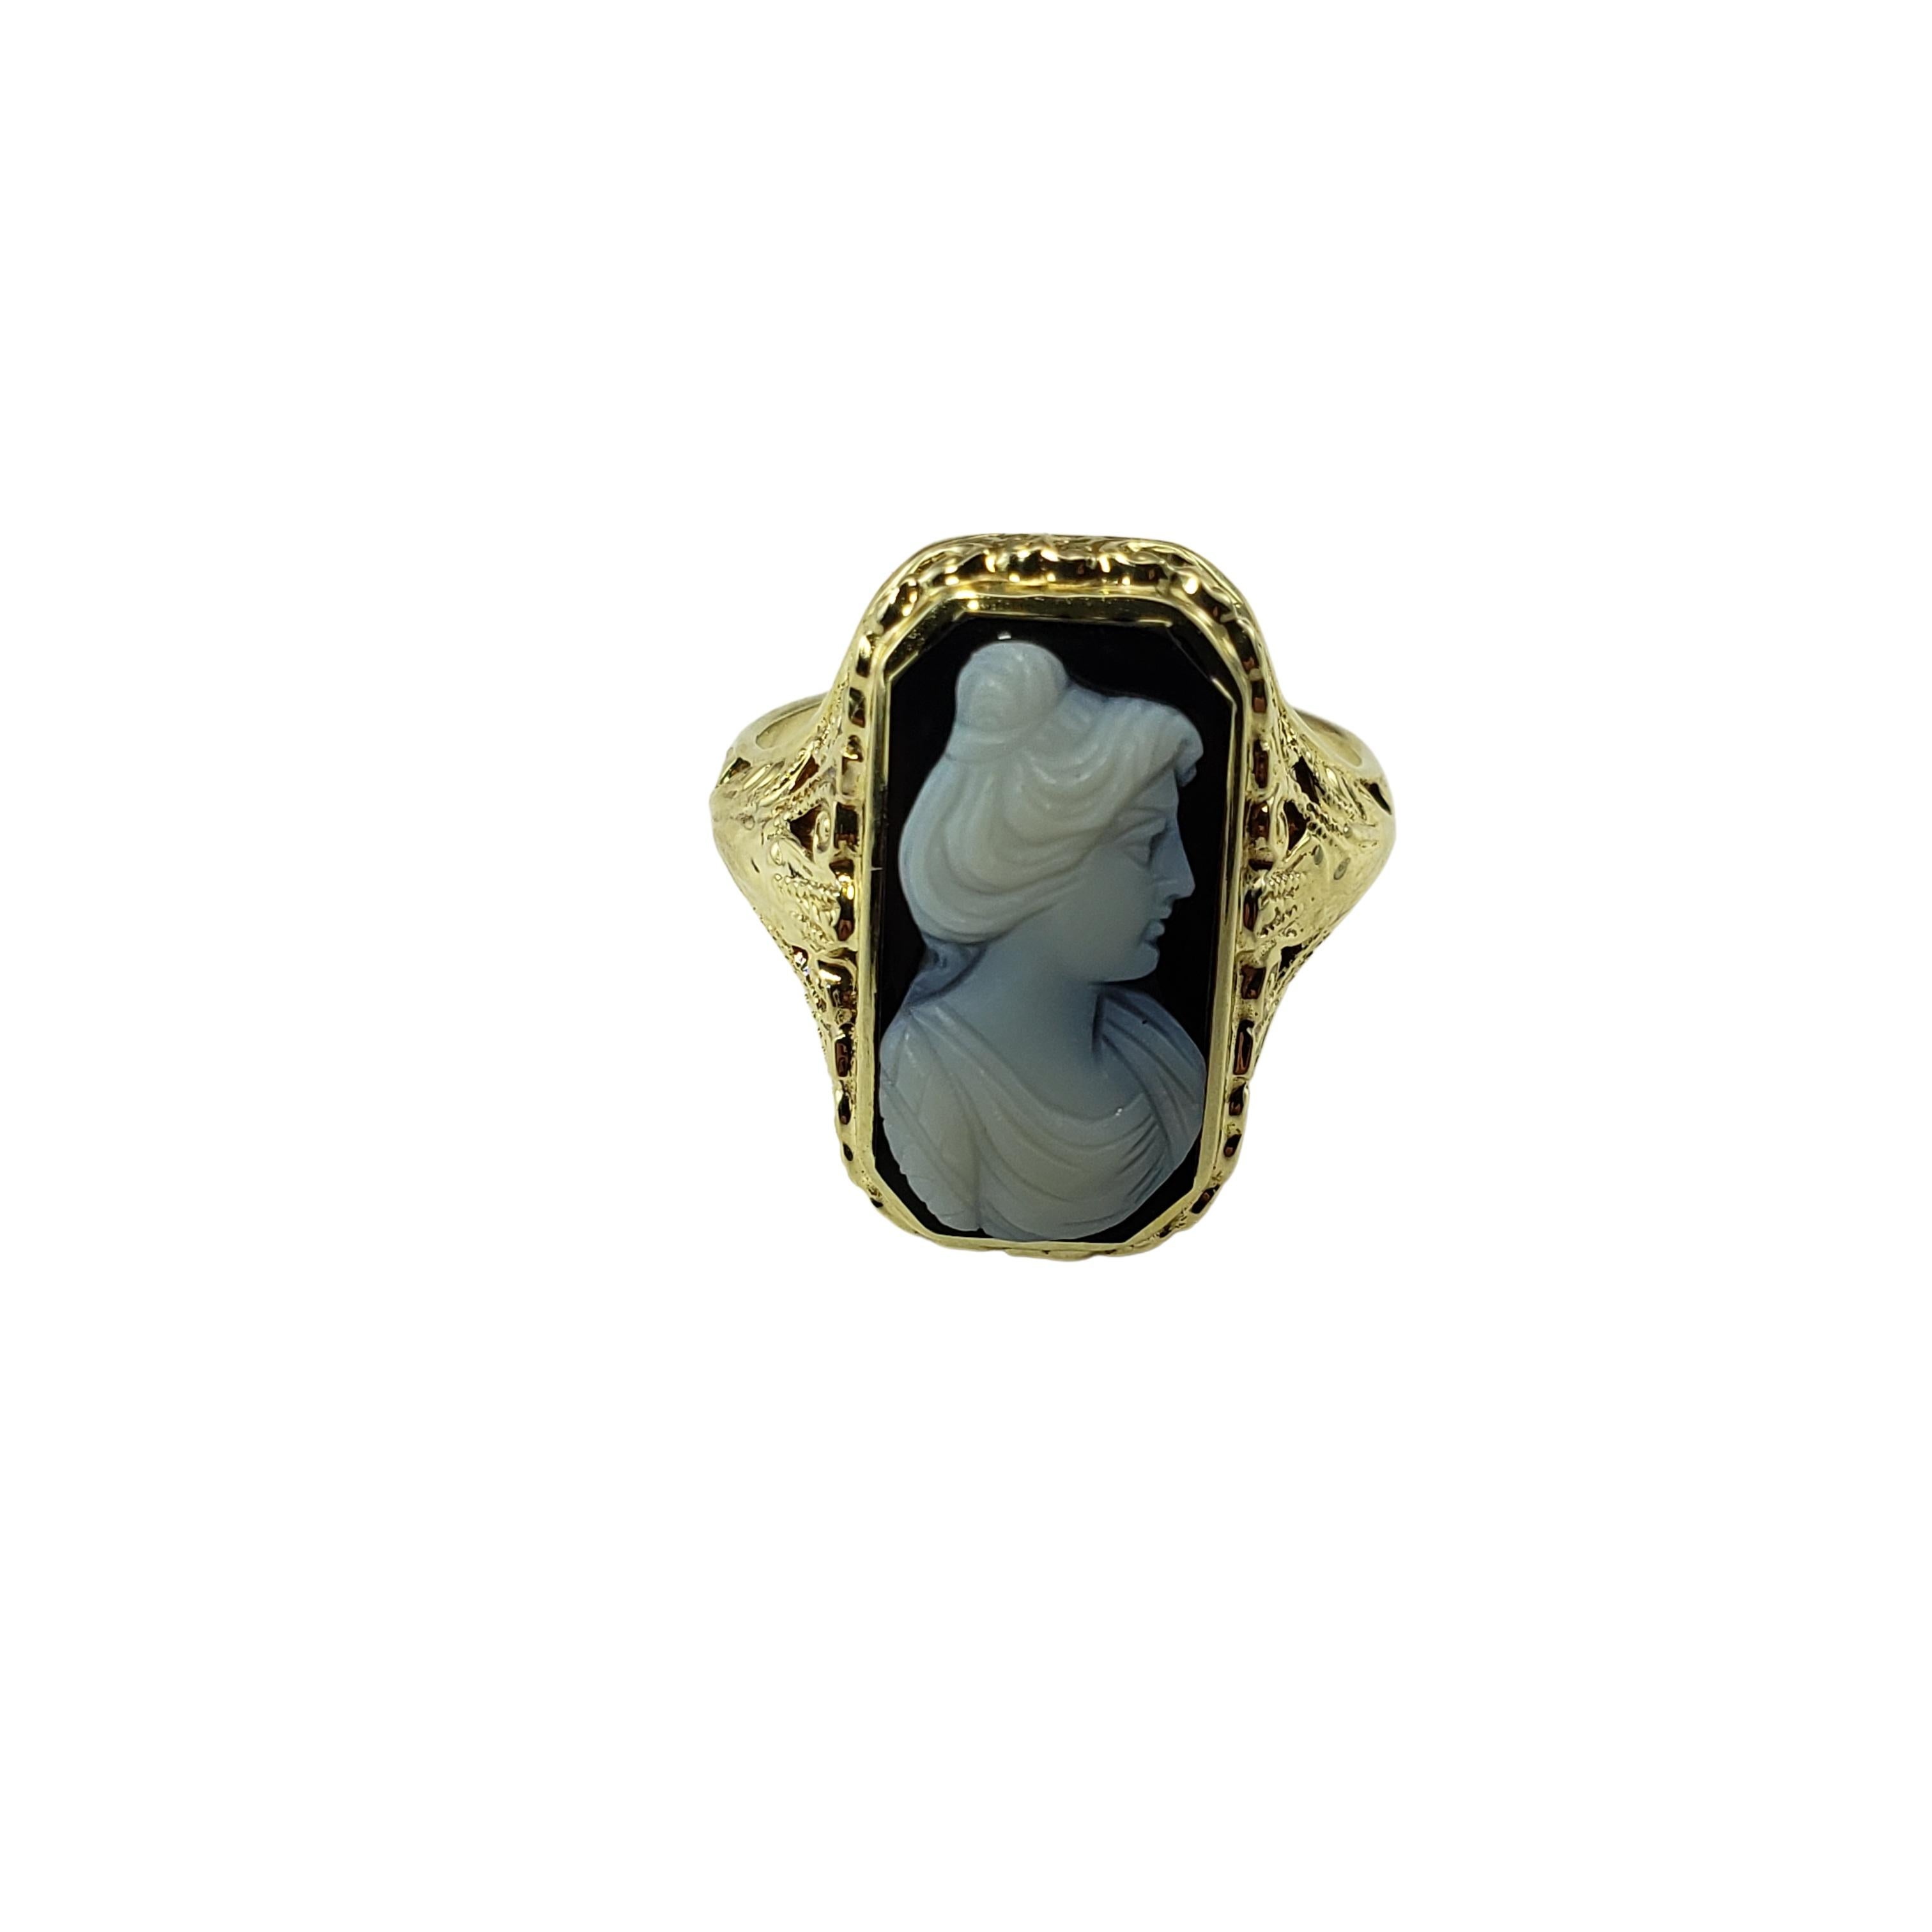 Vintage 14 Karat White Gold Black Onyx Cameo Ring-

This elegant onyx cameo ring features a lovely lady in profile set in beautifully detailed white gold filigree  Top of ring measures 19 mm x 12 mm.  Shank:  2 mm.

Size:  6

Weight:  2.5 dwt. / 